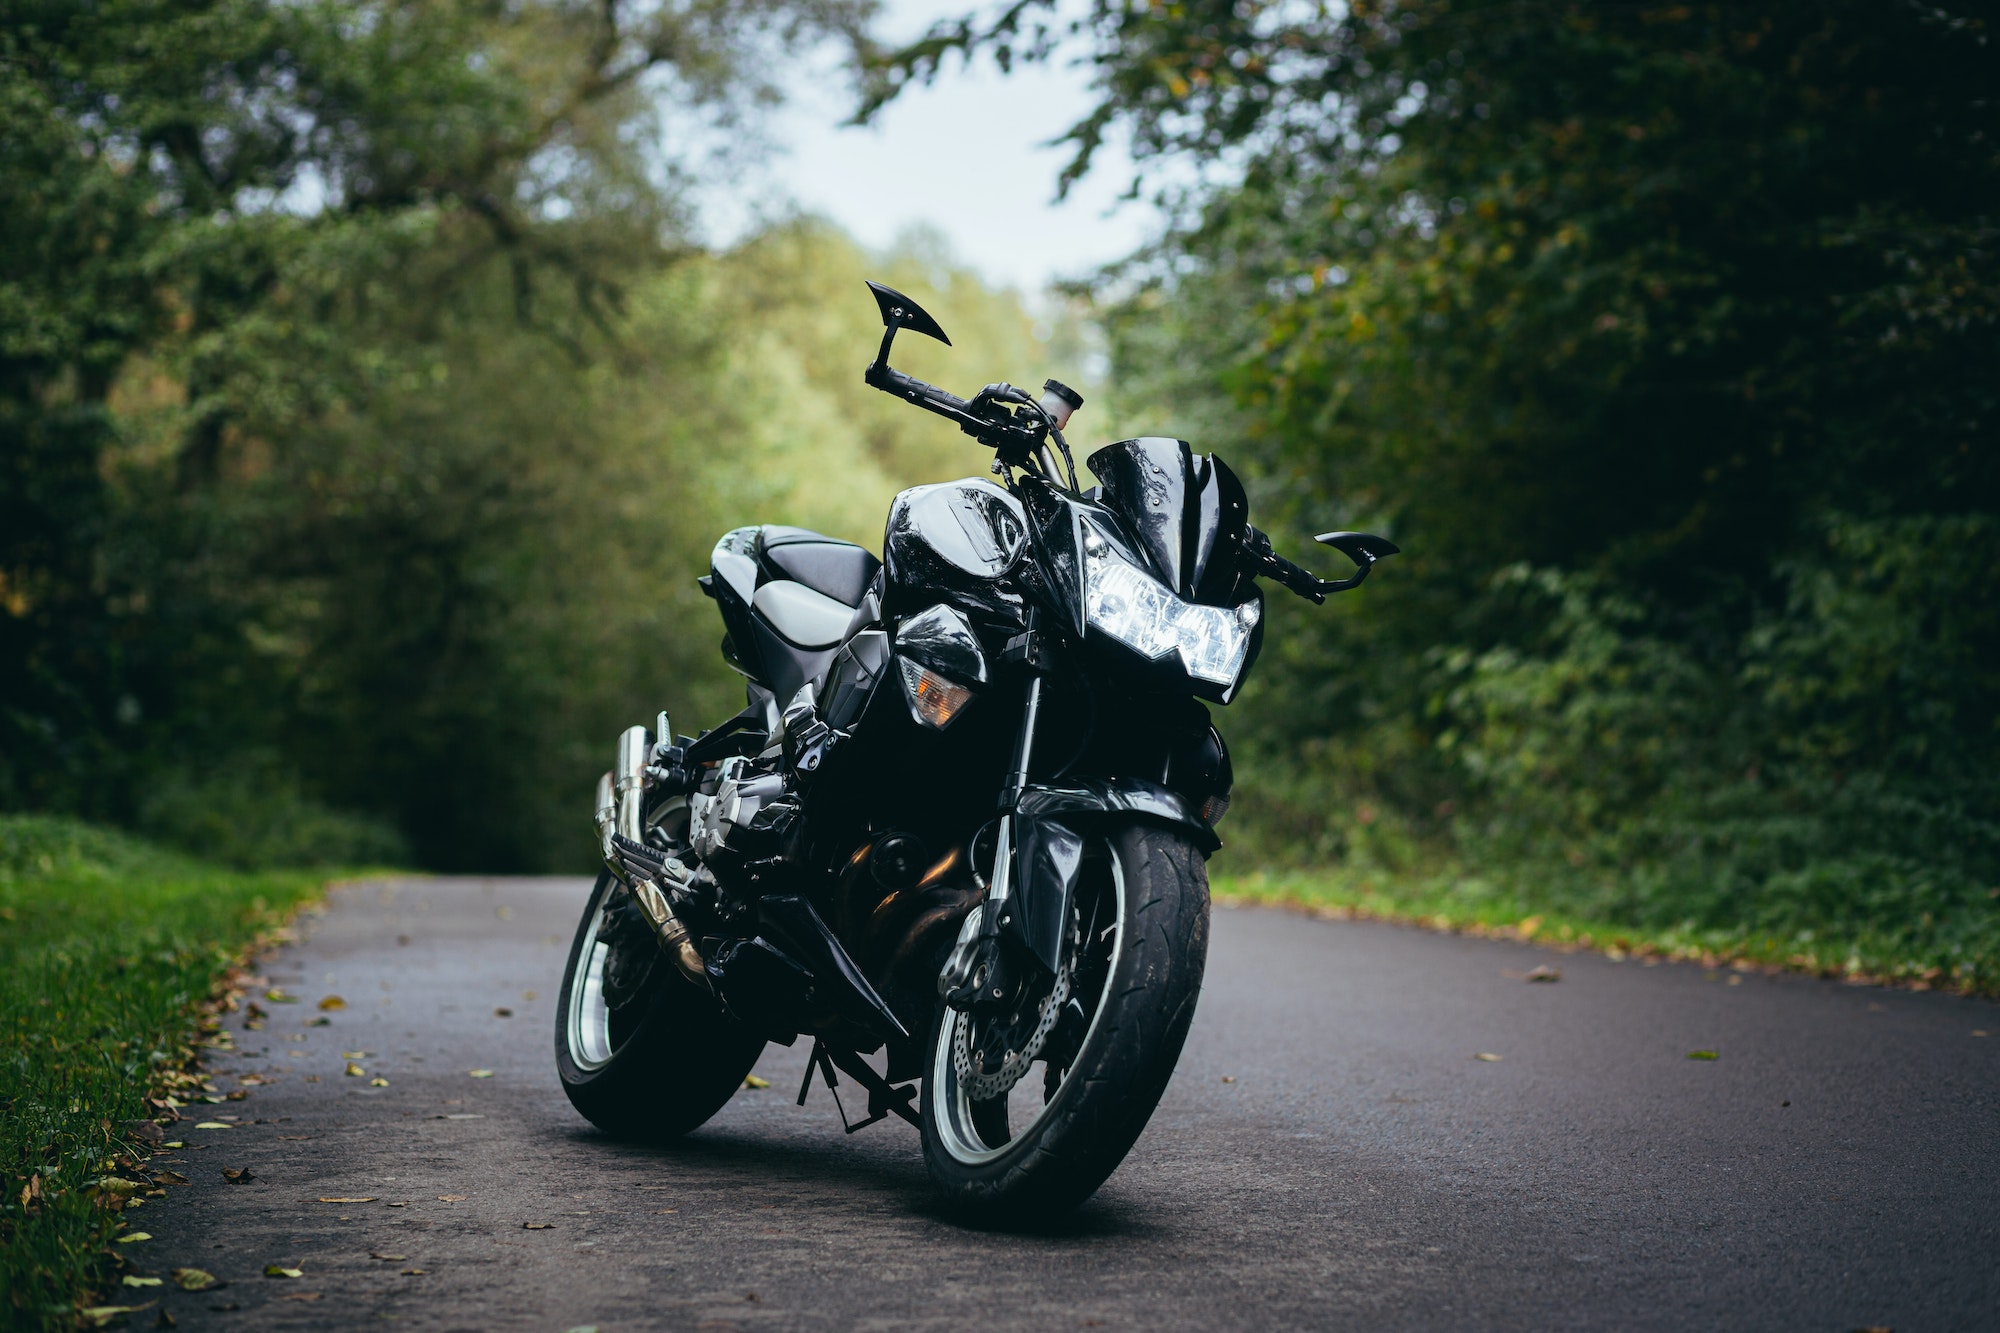 Black sports motorcycle standing on a forest road on a background of green trees